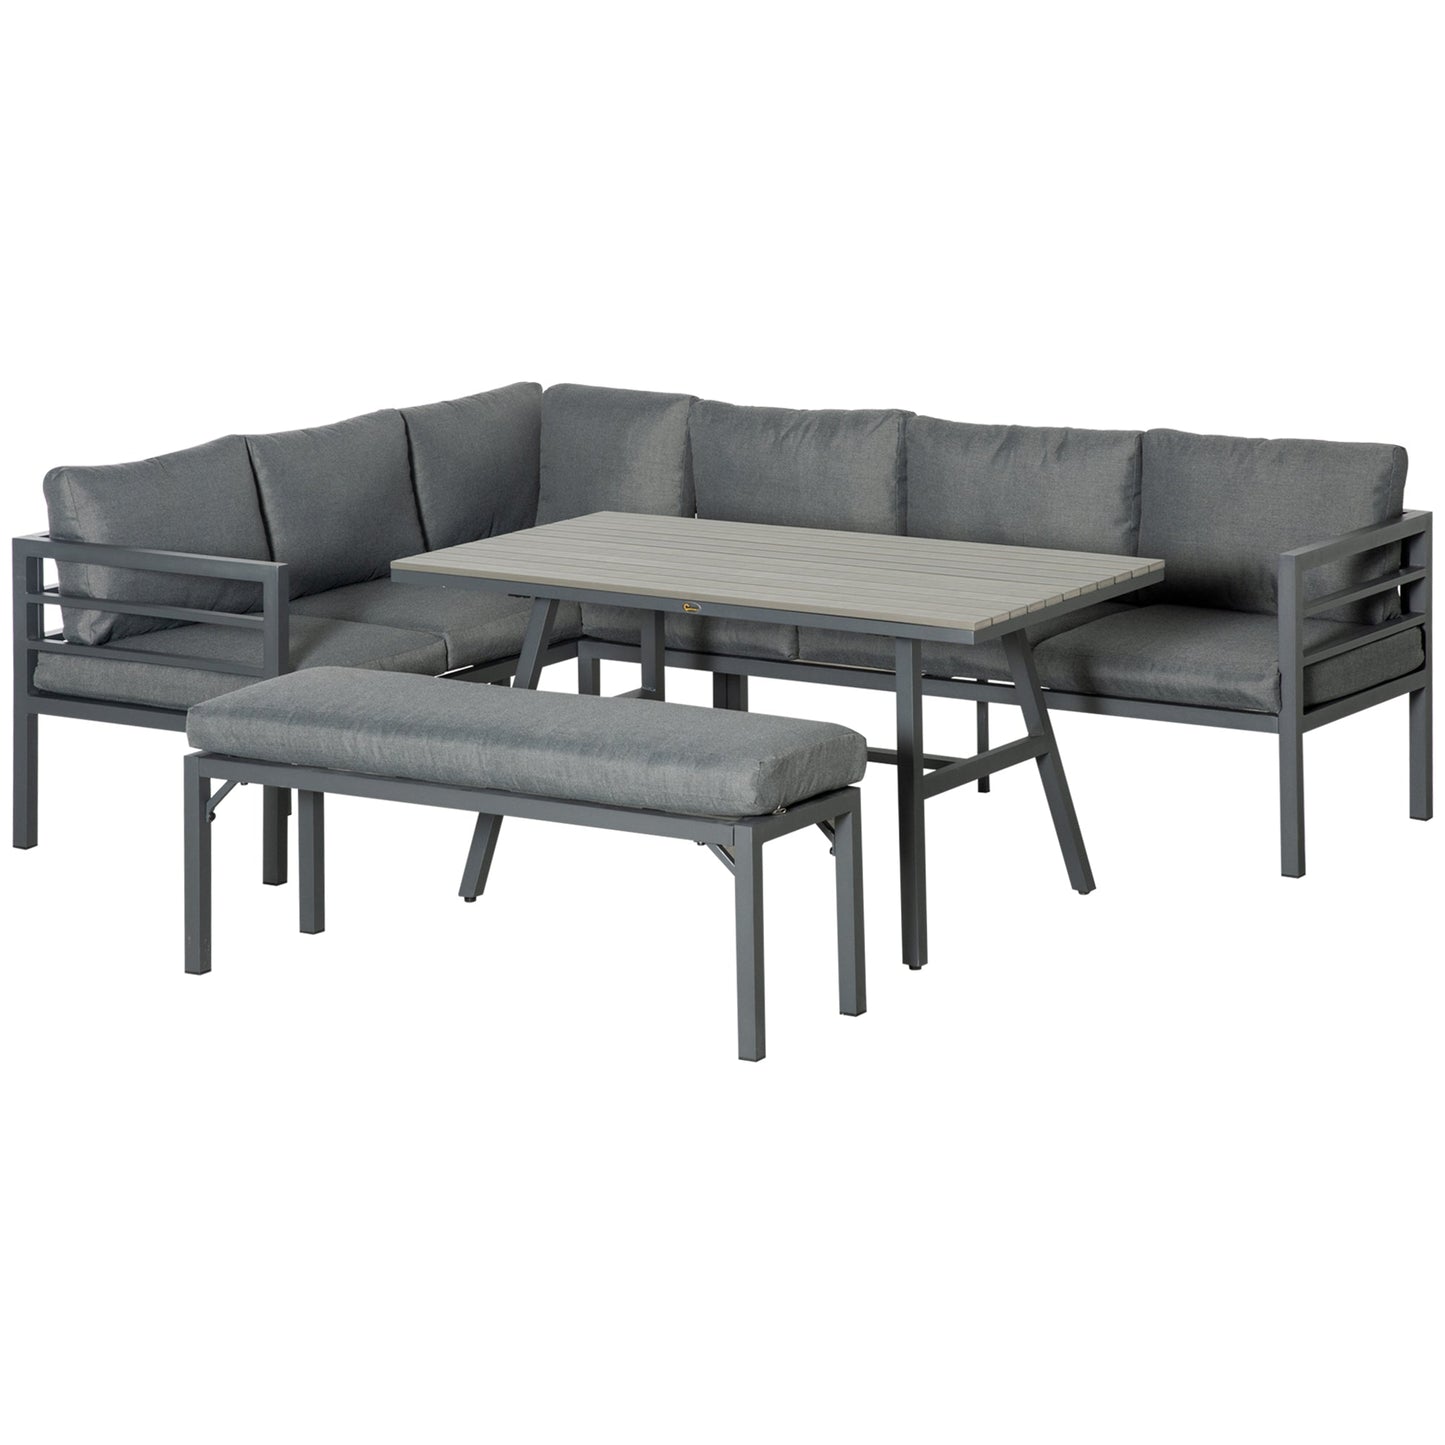 Outdoor and Garden-4 Piece Patio Furniture Set Aluminium Outdoor Dining Sofa Set Sectional Conversation Set w/ Bench, Dining Table & Cushions, Grey - Outdoor Style Company